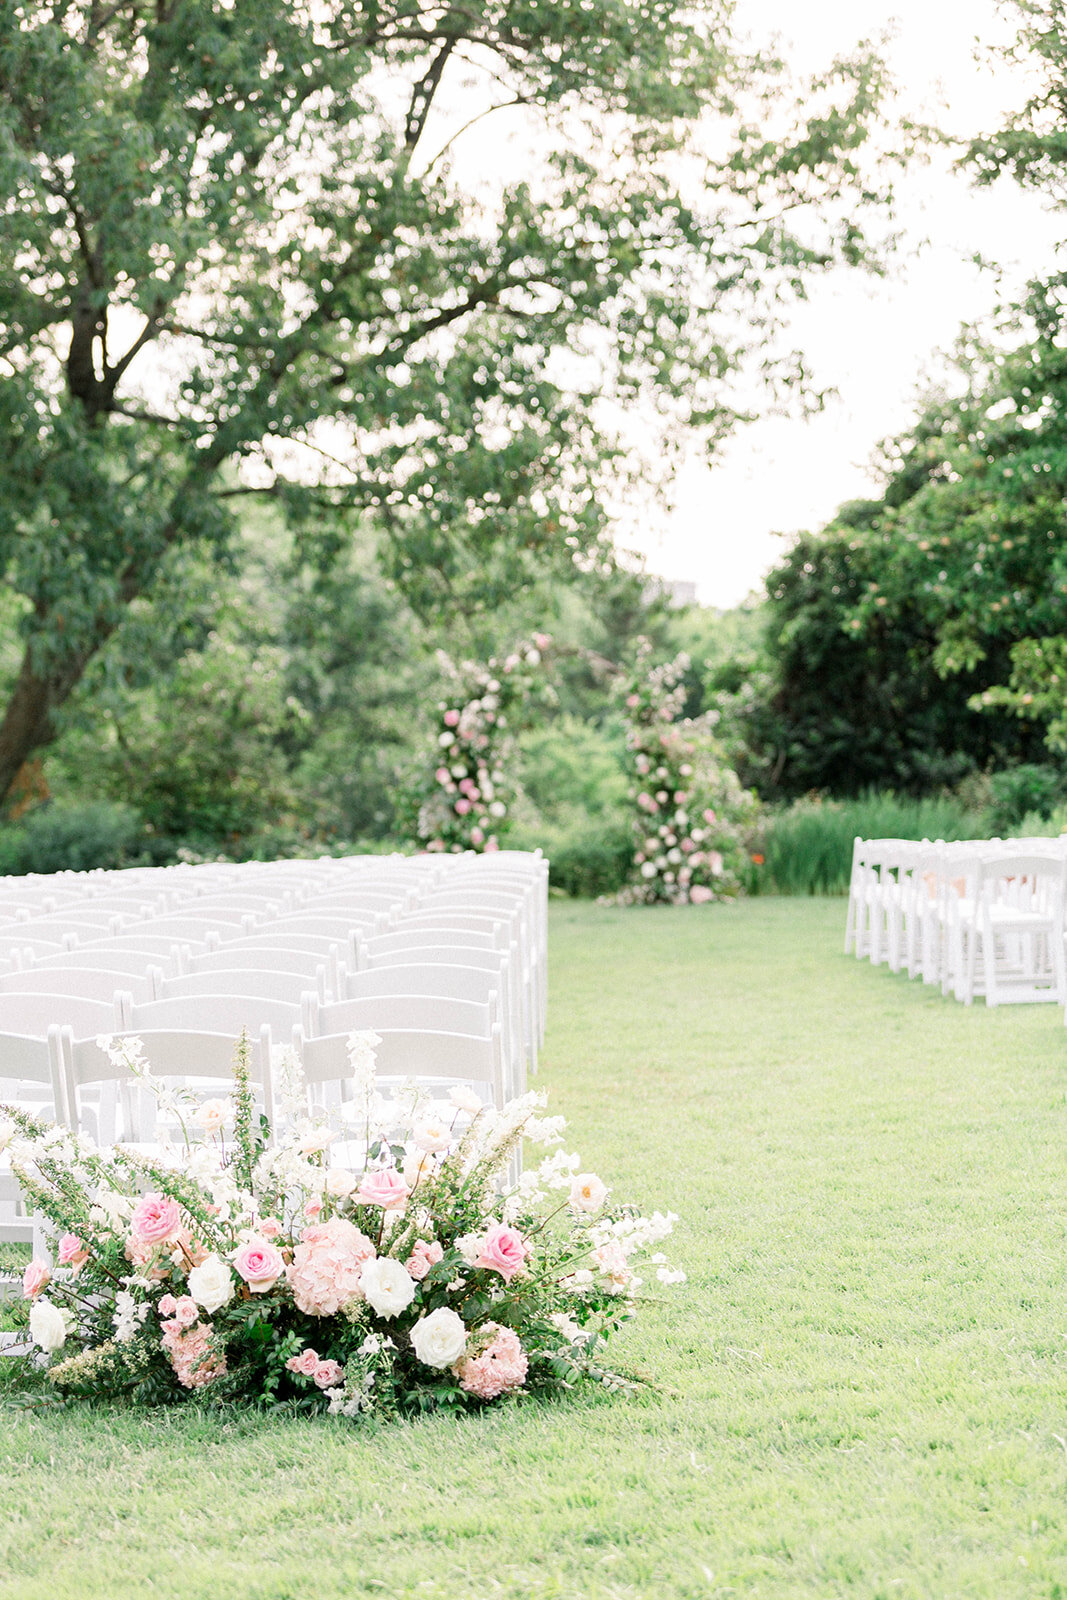 A fairytail arch filled with blush and ivory garden roses, majolica spray roses, champagne roses, eleagnus, and lush sprawling greenery. Designed by Rosemary & Finch in Nashville, TN.